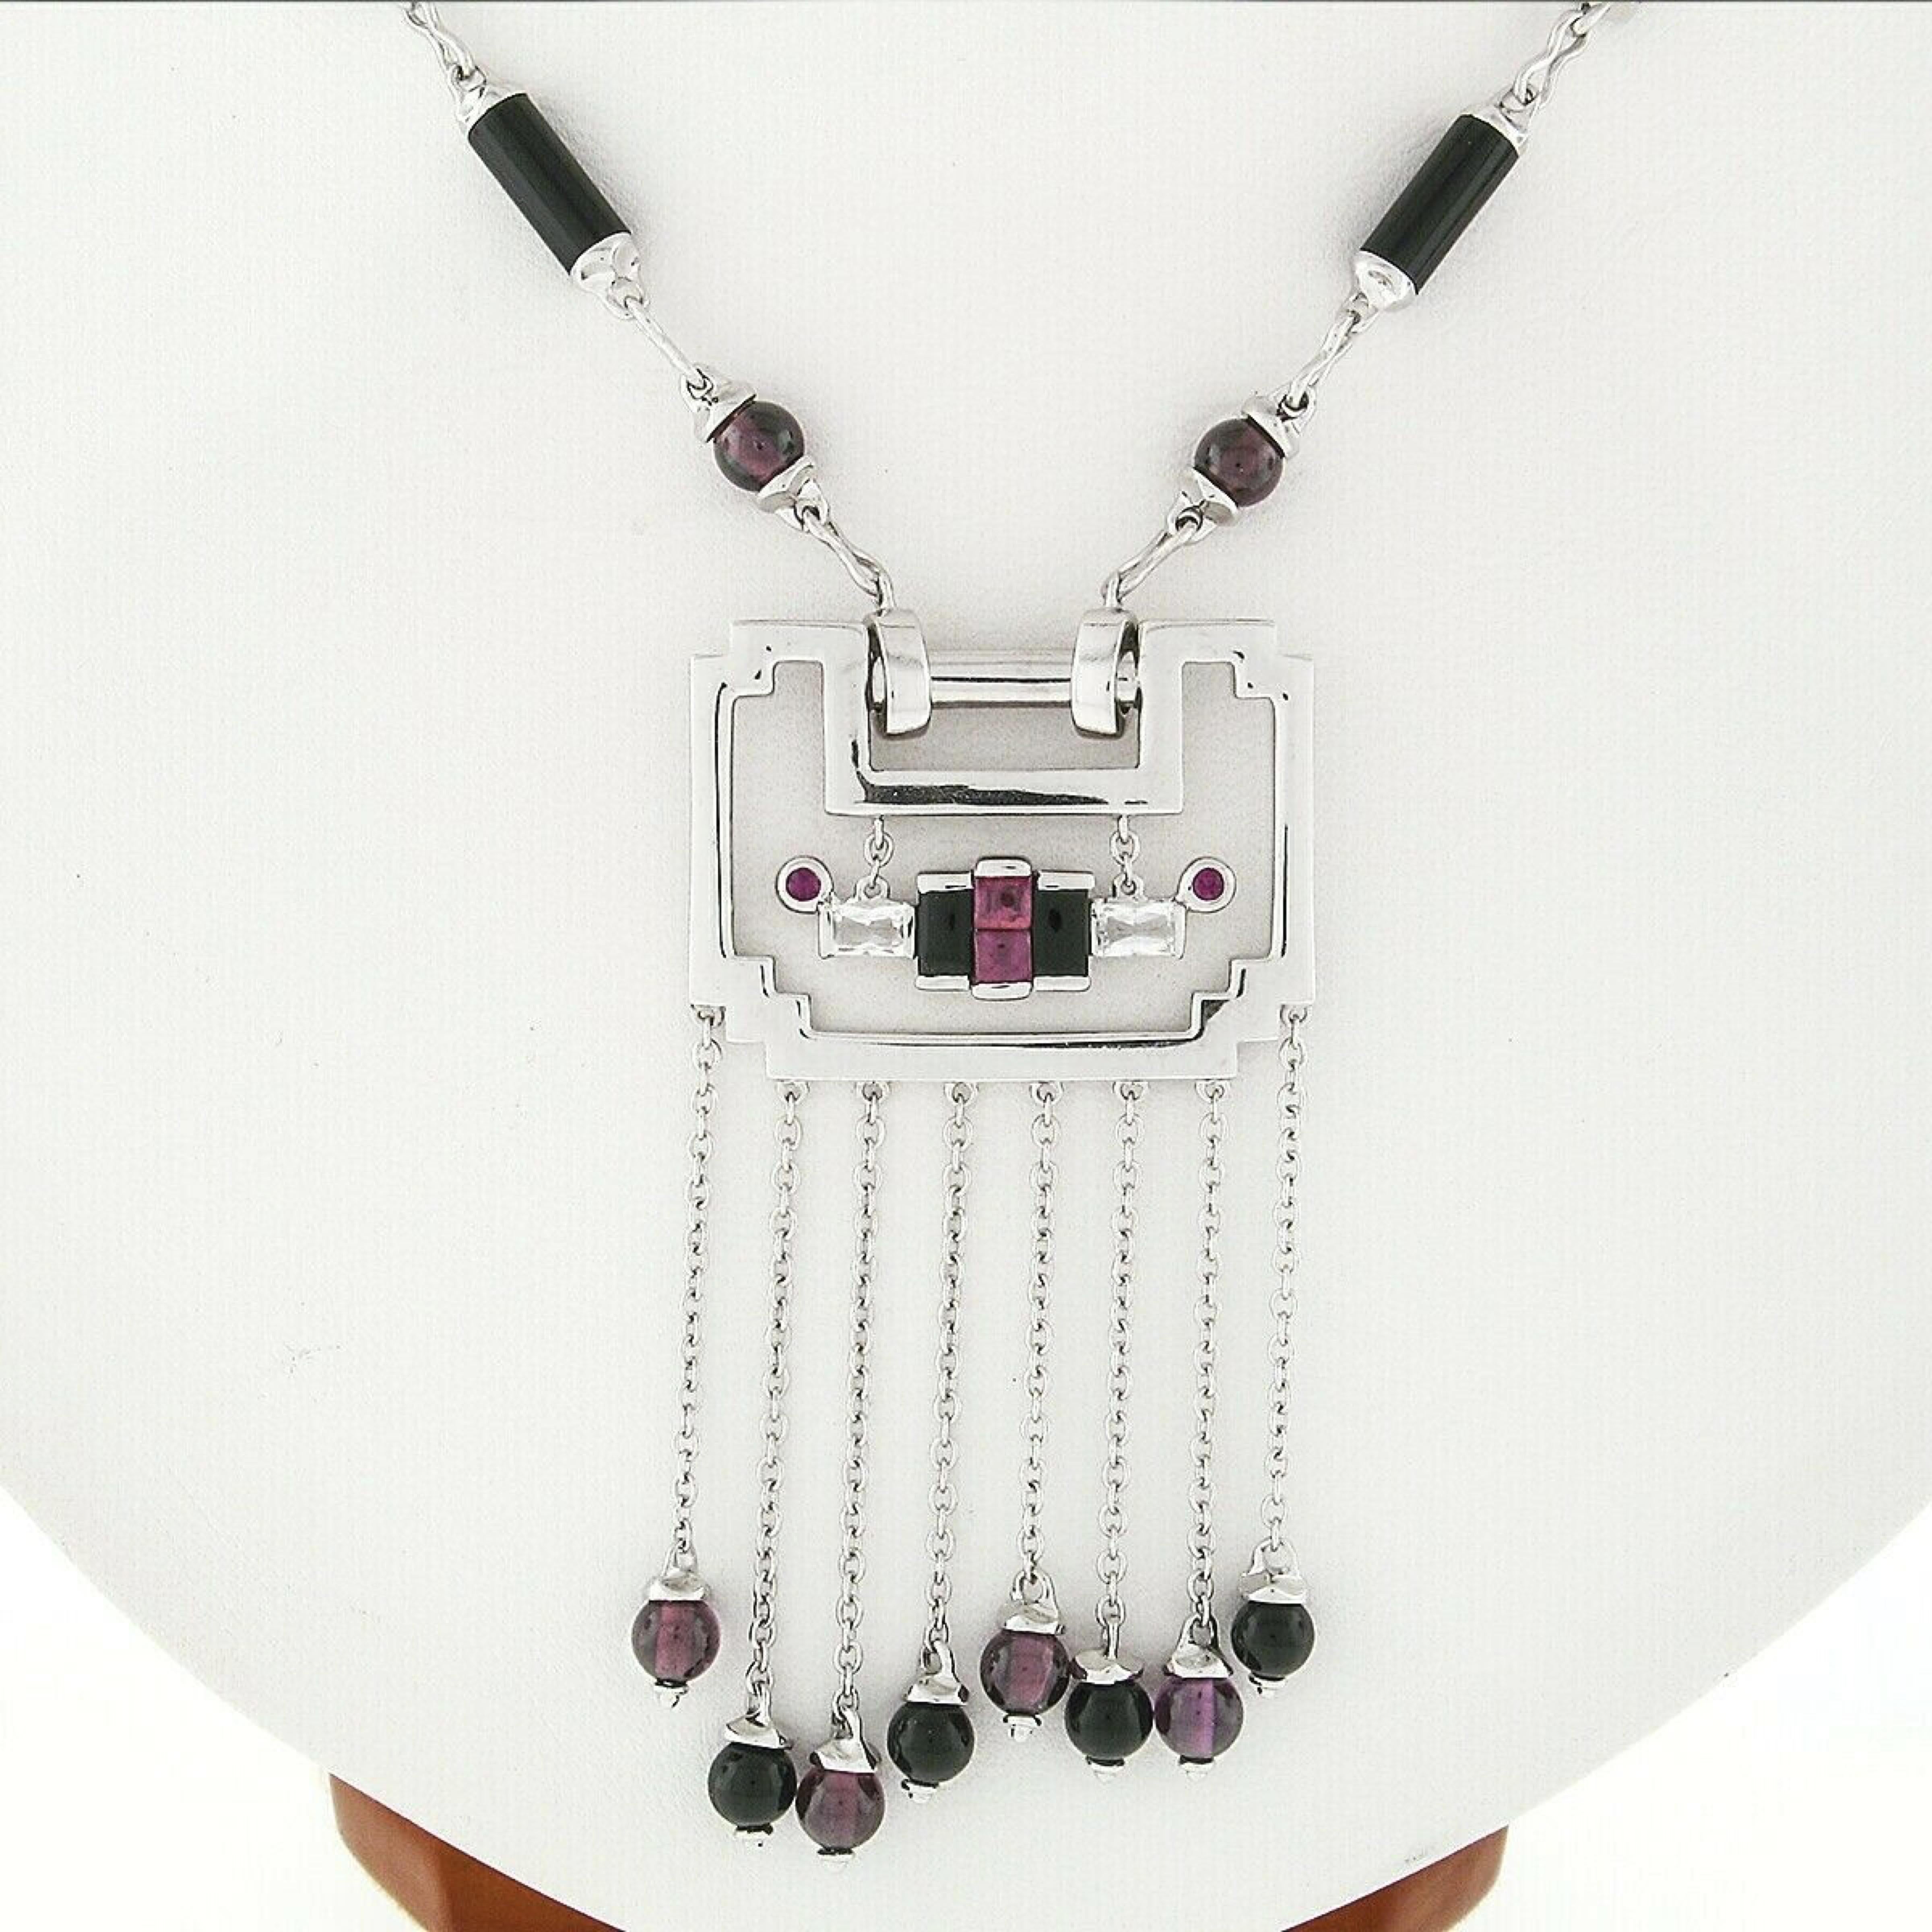 Here we have a stunning fancy tassel/chandelier pendant necklace crafted from solid 18k white gold. It features alternating cylinder black onyx and beaded purplish red tourmaline stones that beautifully adorn the 20 inches chain throughout. The